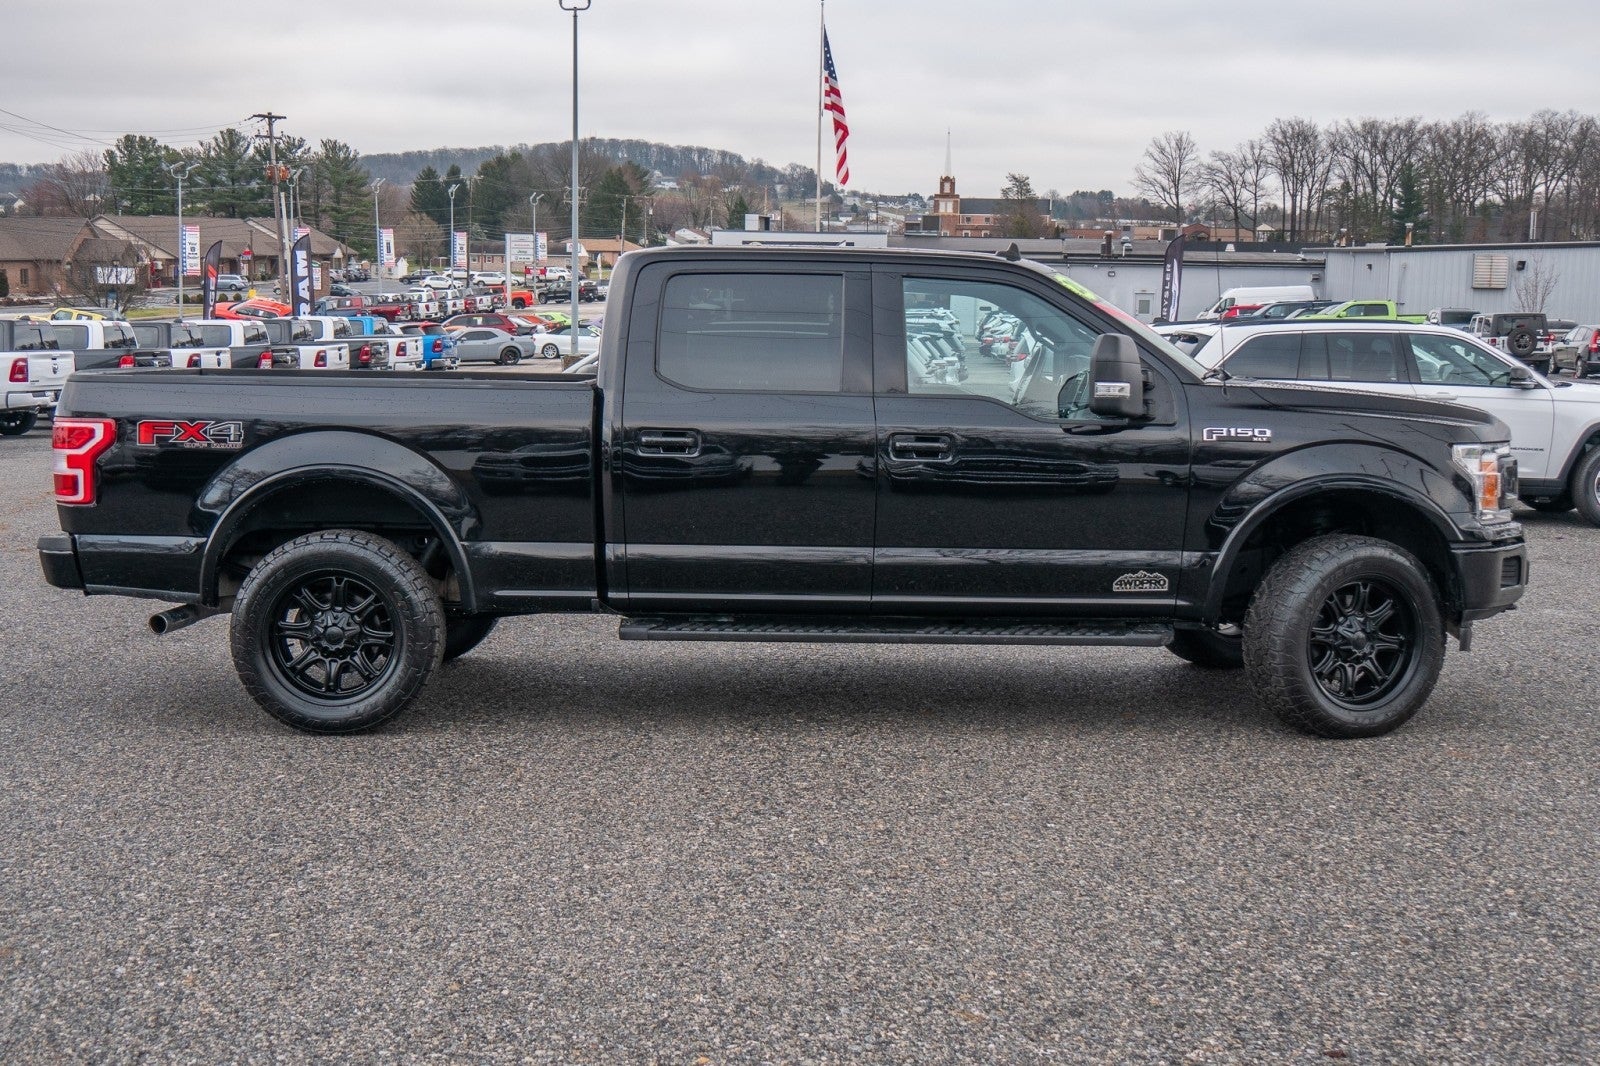 2020 Ford F-150 Supercrew 6.5 Bed XLT